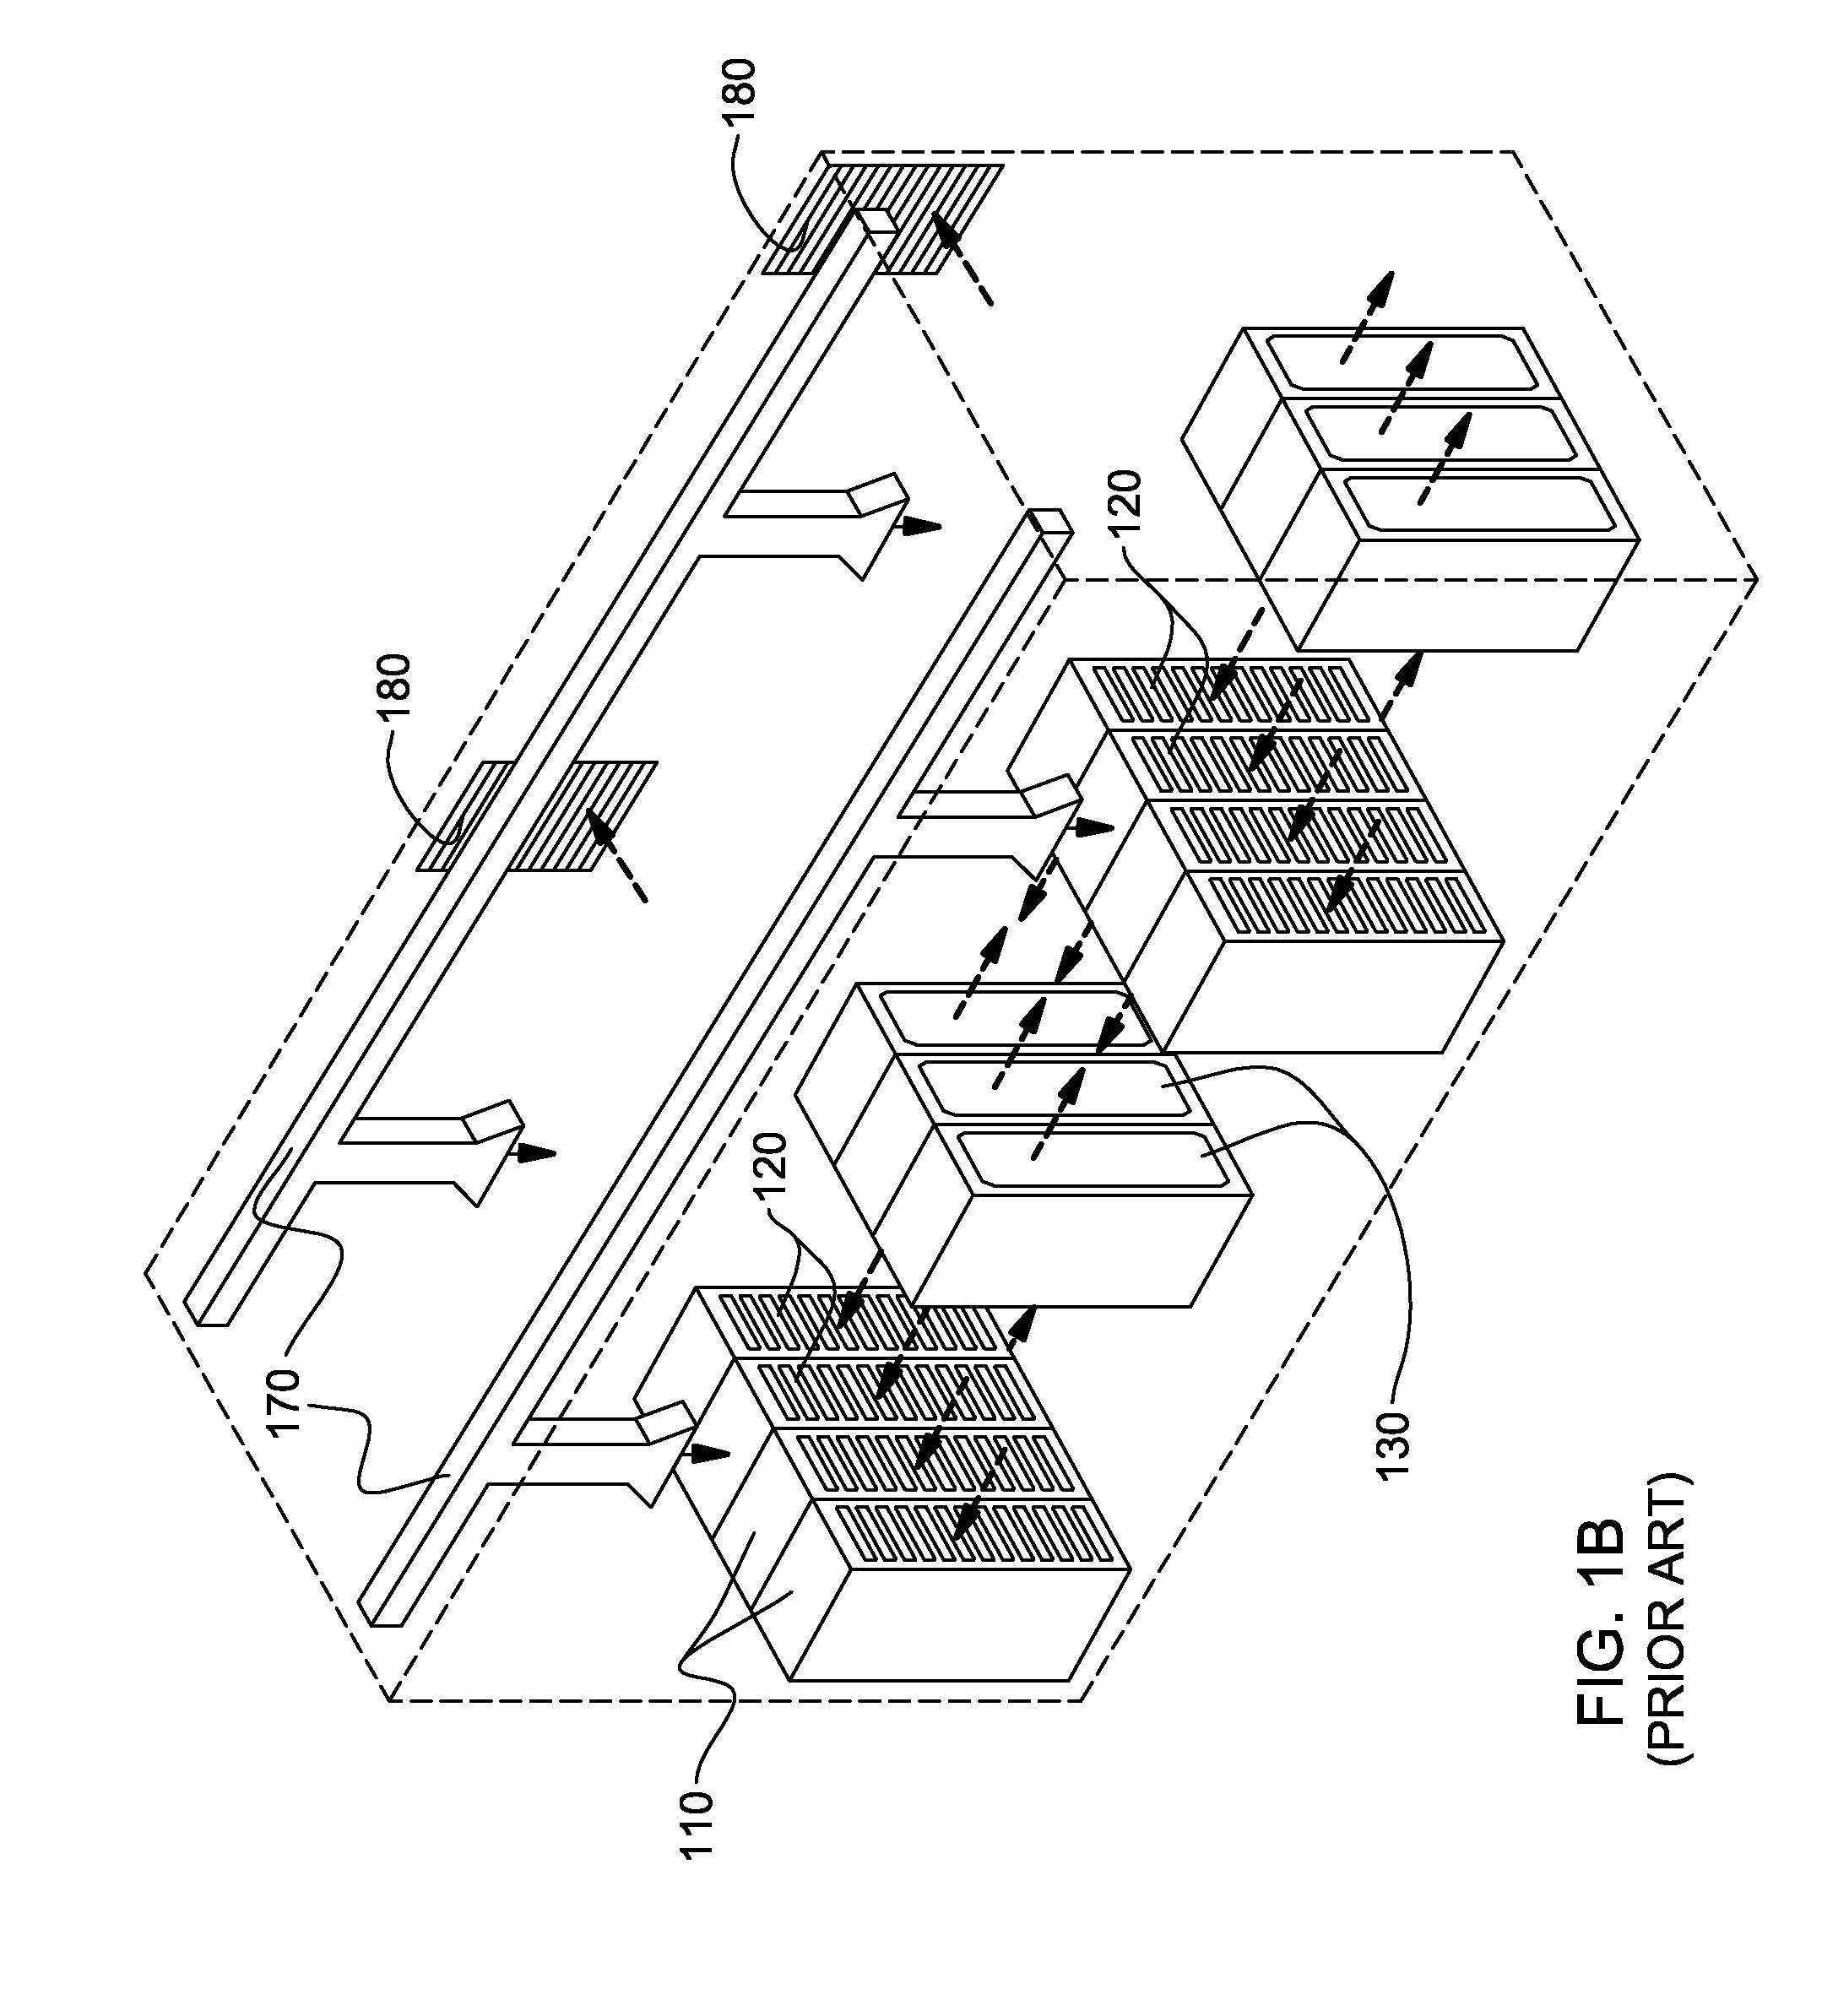 Docking station with closed loop airlfow path for facilitating cooling of an electronics rack